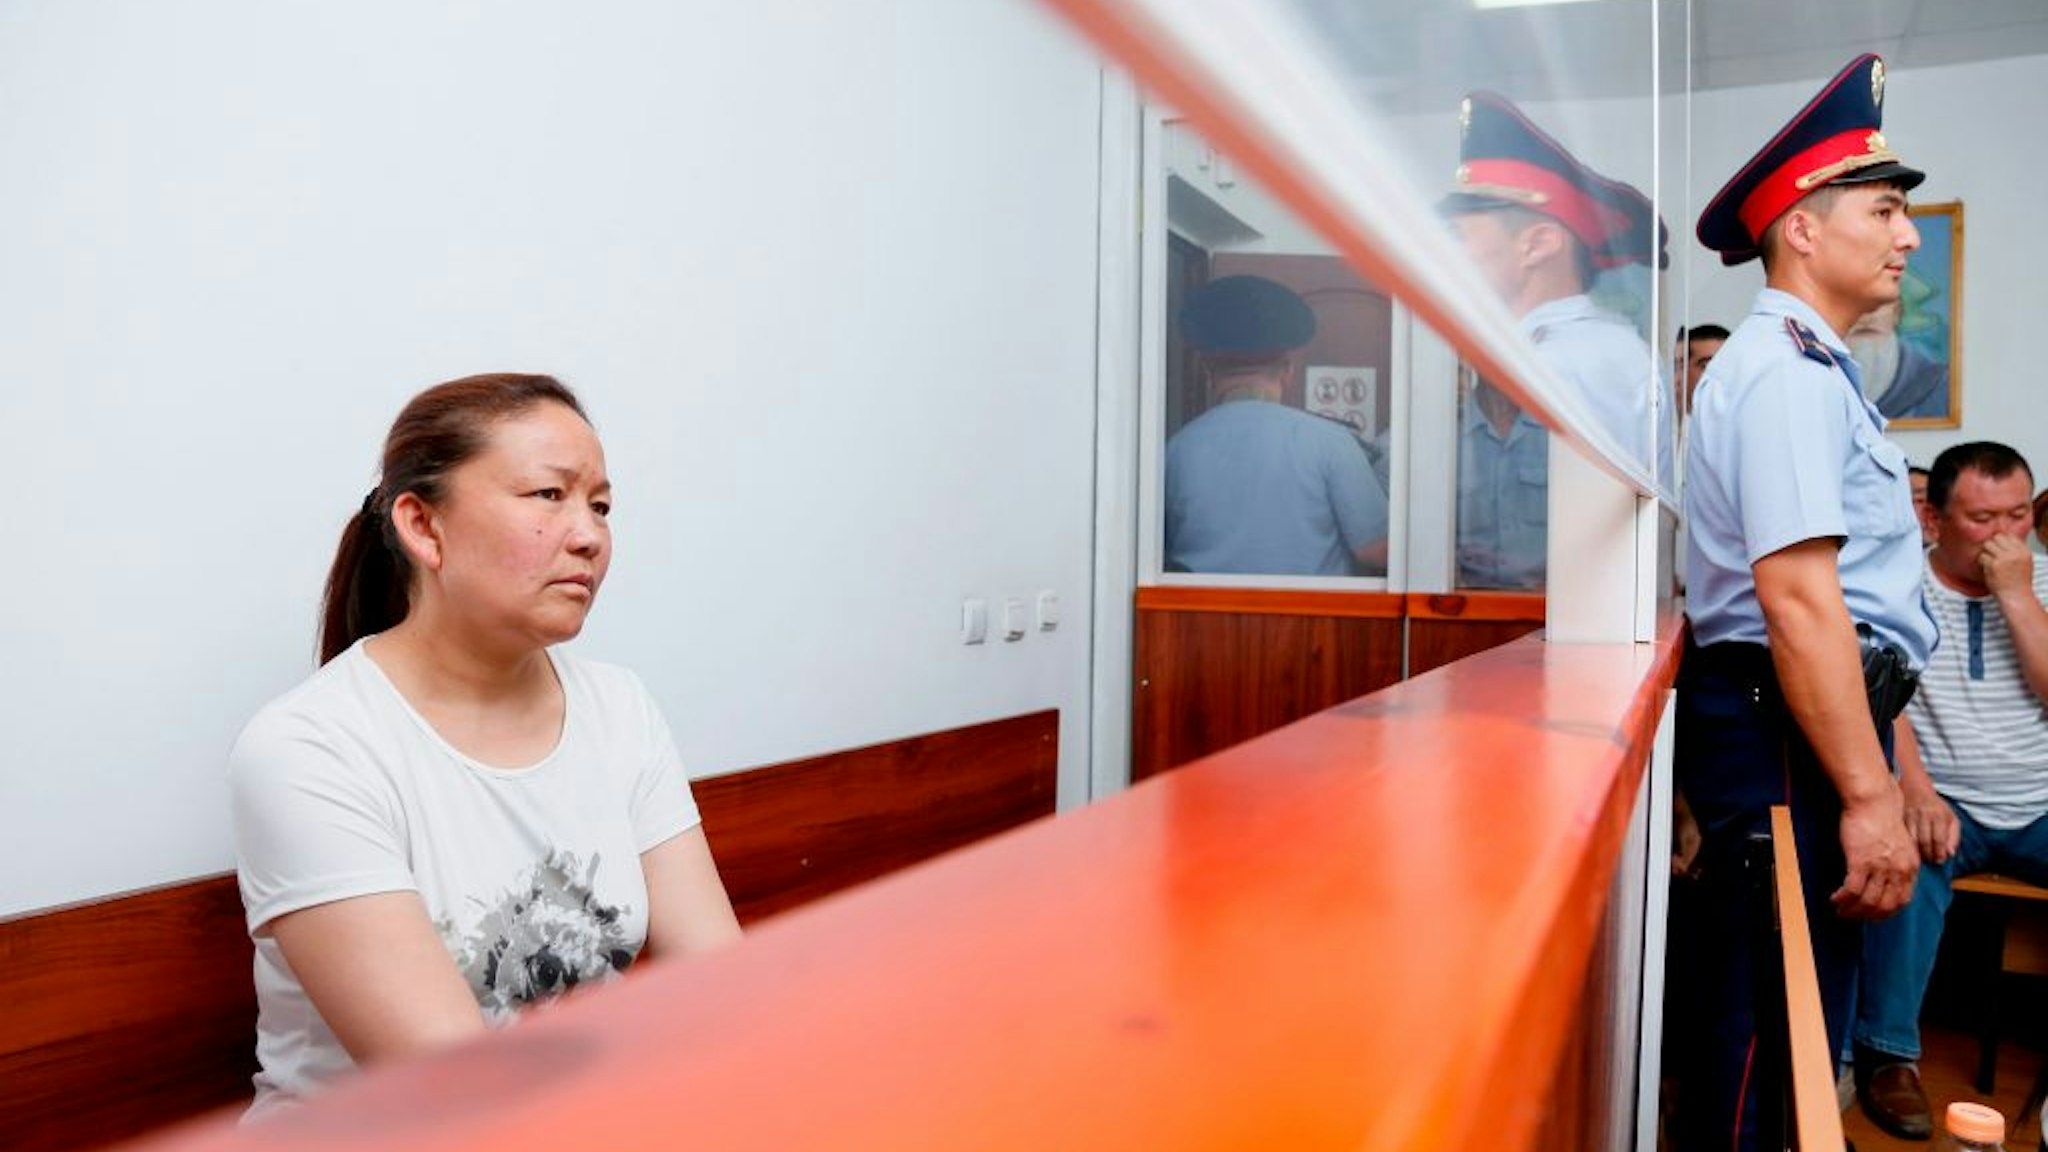 A picture taken on July 13, 2018 shows Sayragul Sauytbay, 41, an ethnic Kazakh Chinese national and former employee of the Chinese state, who is accused of illegally crossing the border between the countries to join her family in Kazakhstan, sits inside a defendants' cage during a hearing at a court in the city of Zharkent.